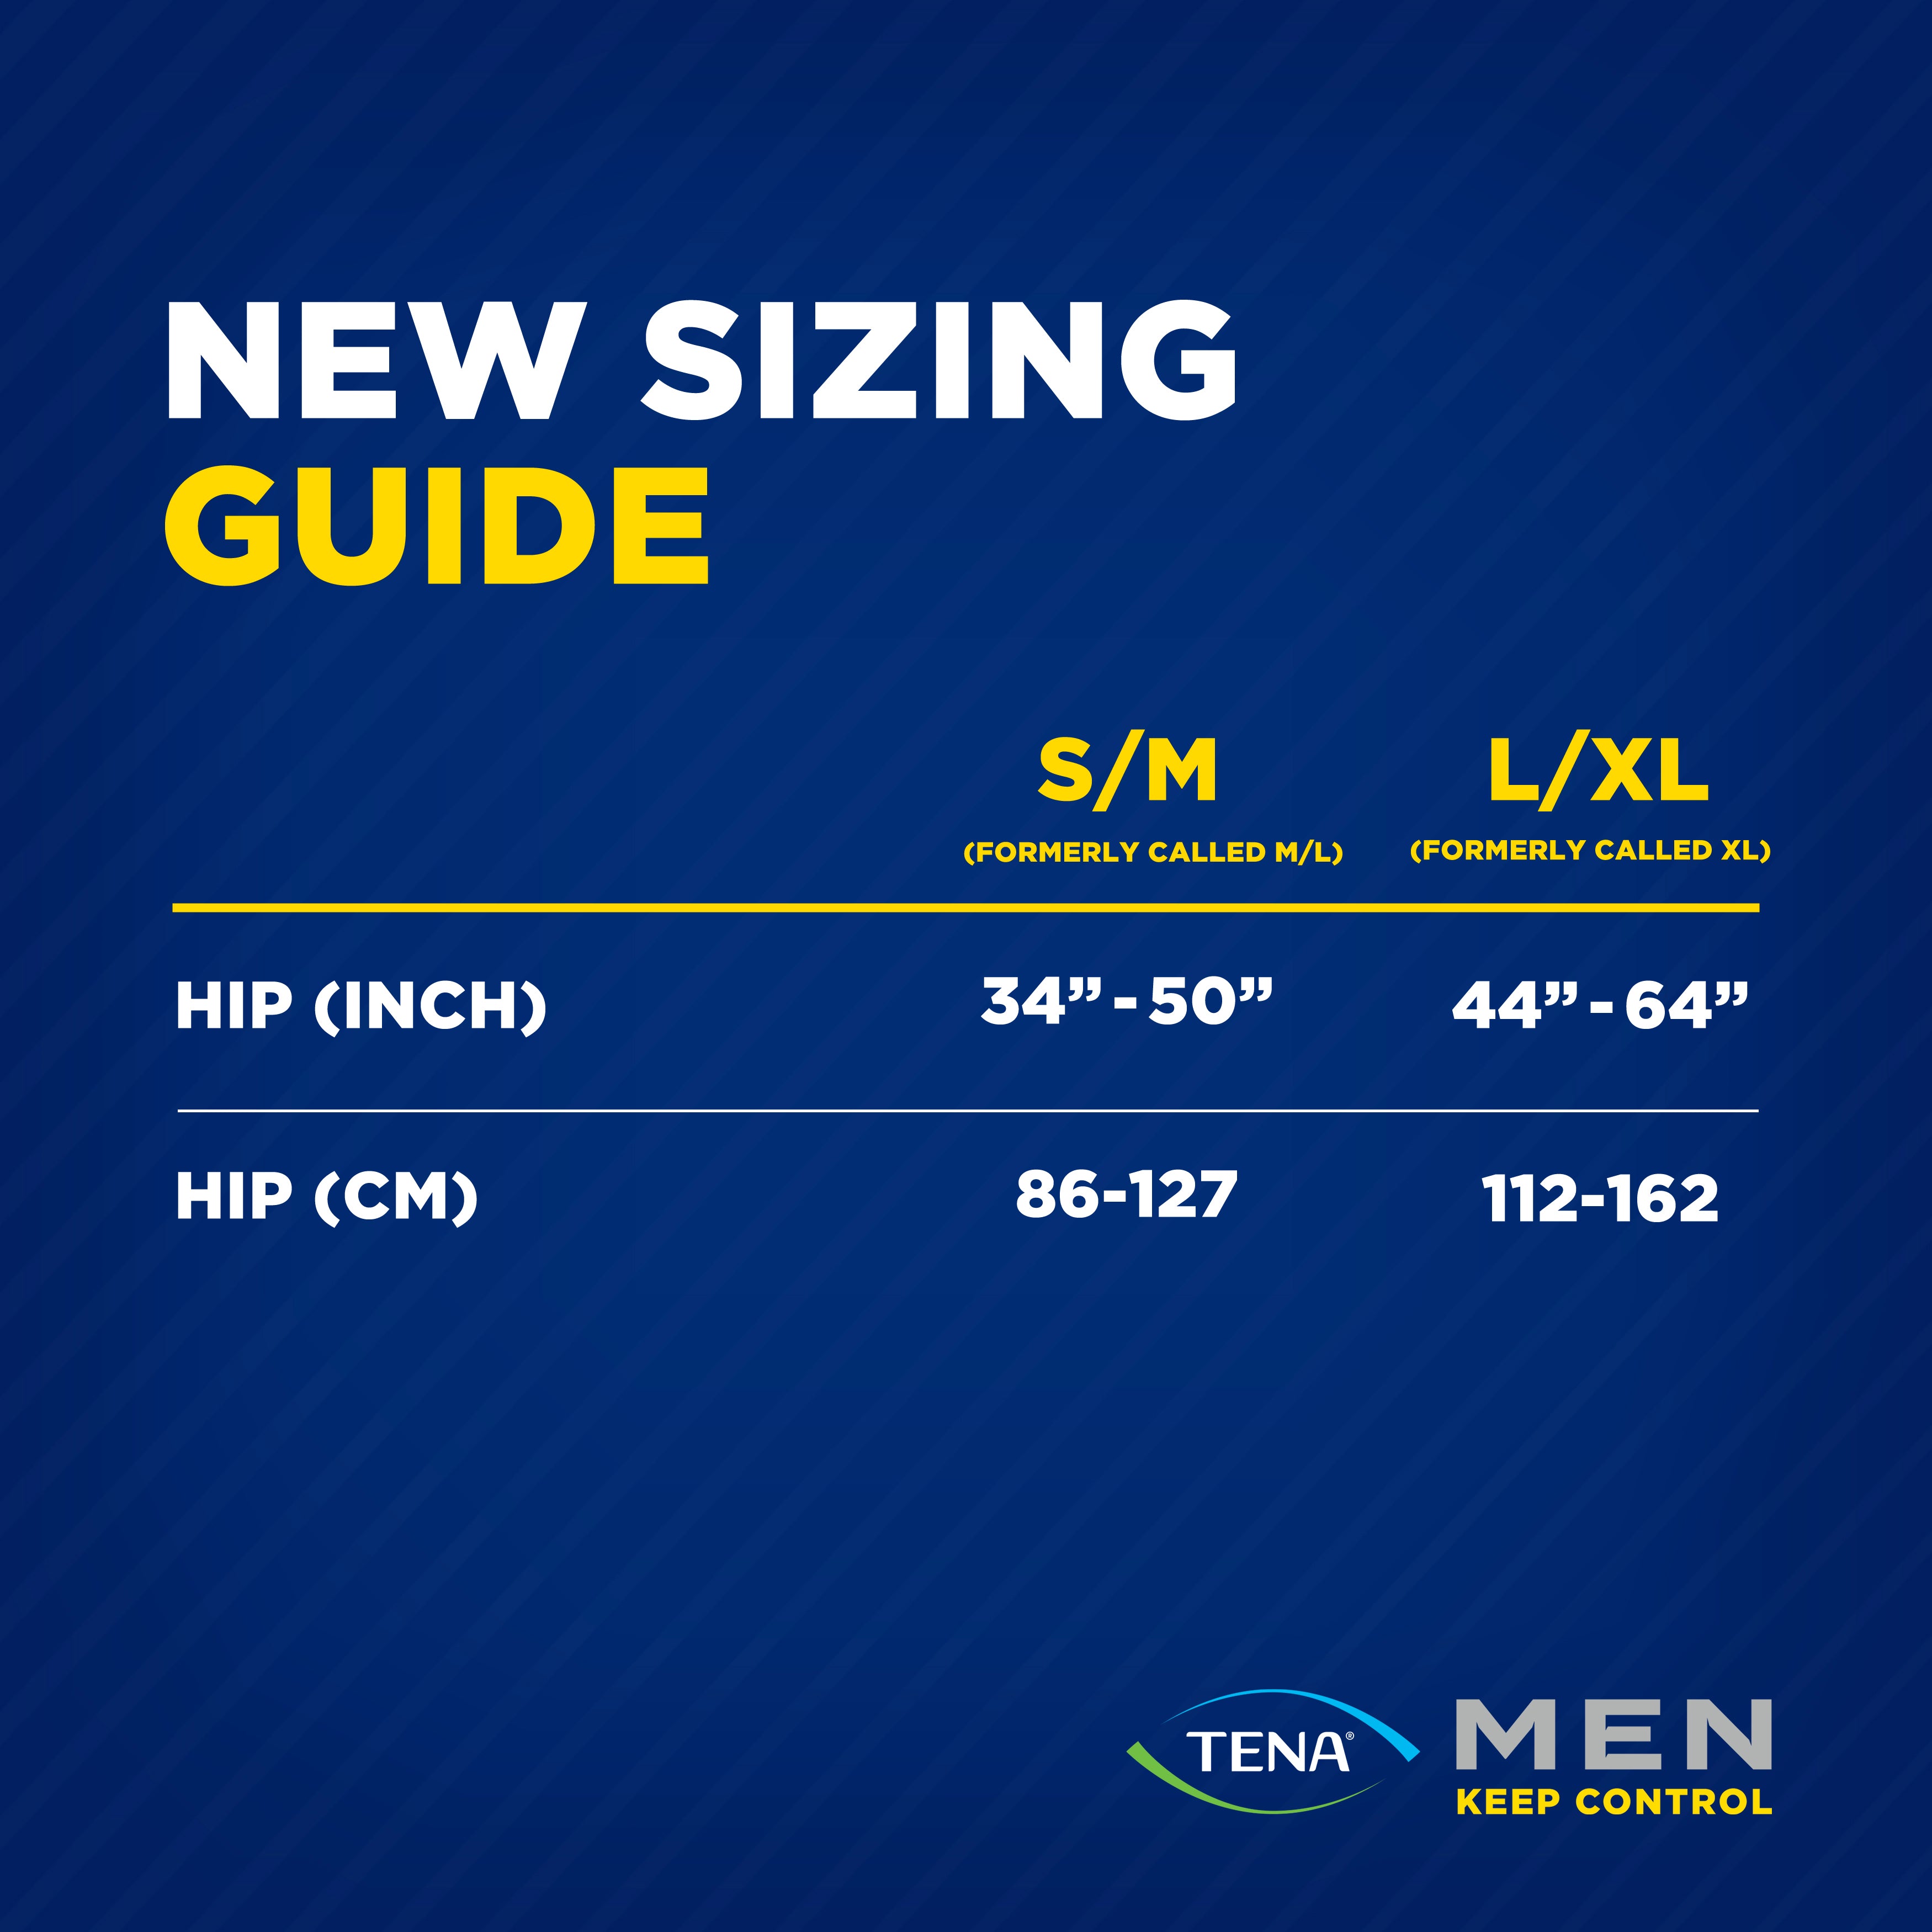 A table with sizing guide, small medium 34 inches to 50 inches, large extra large 44 inches to 64 inches